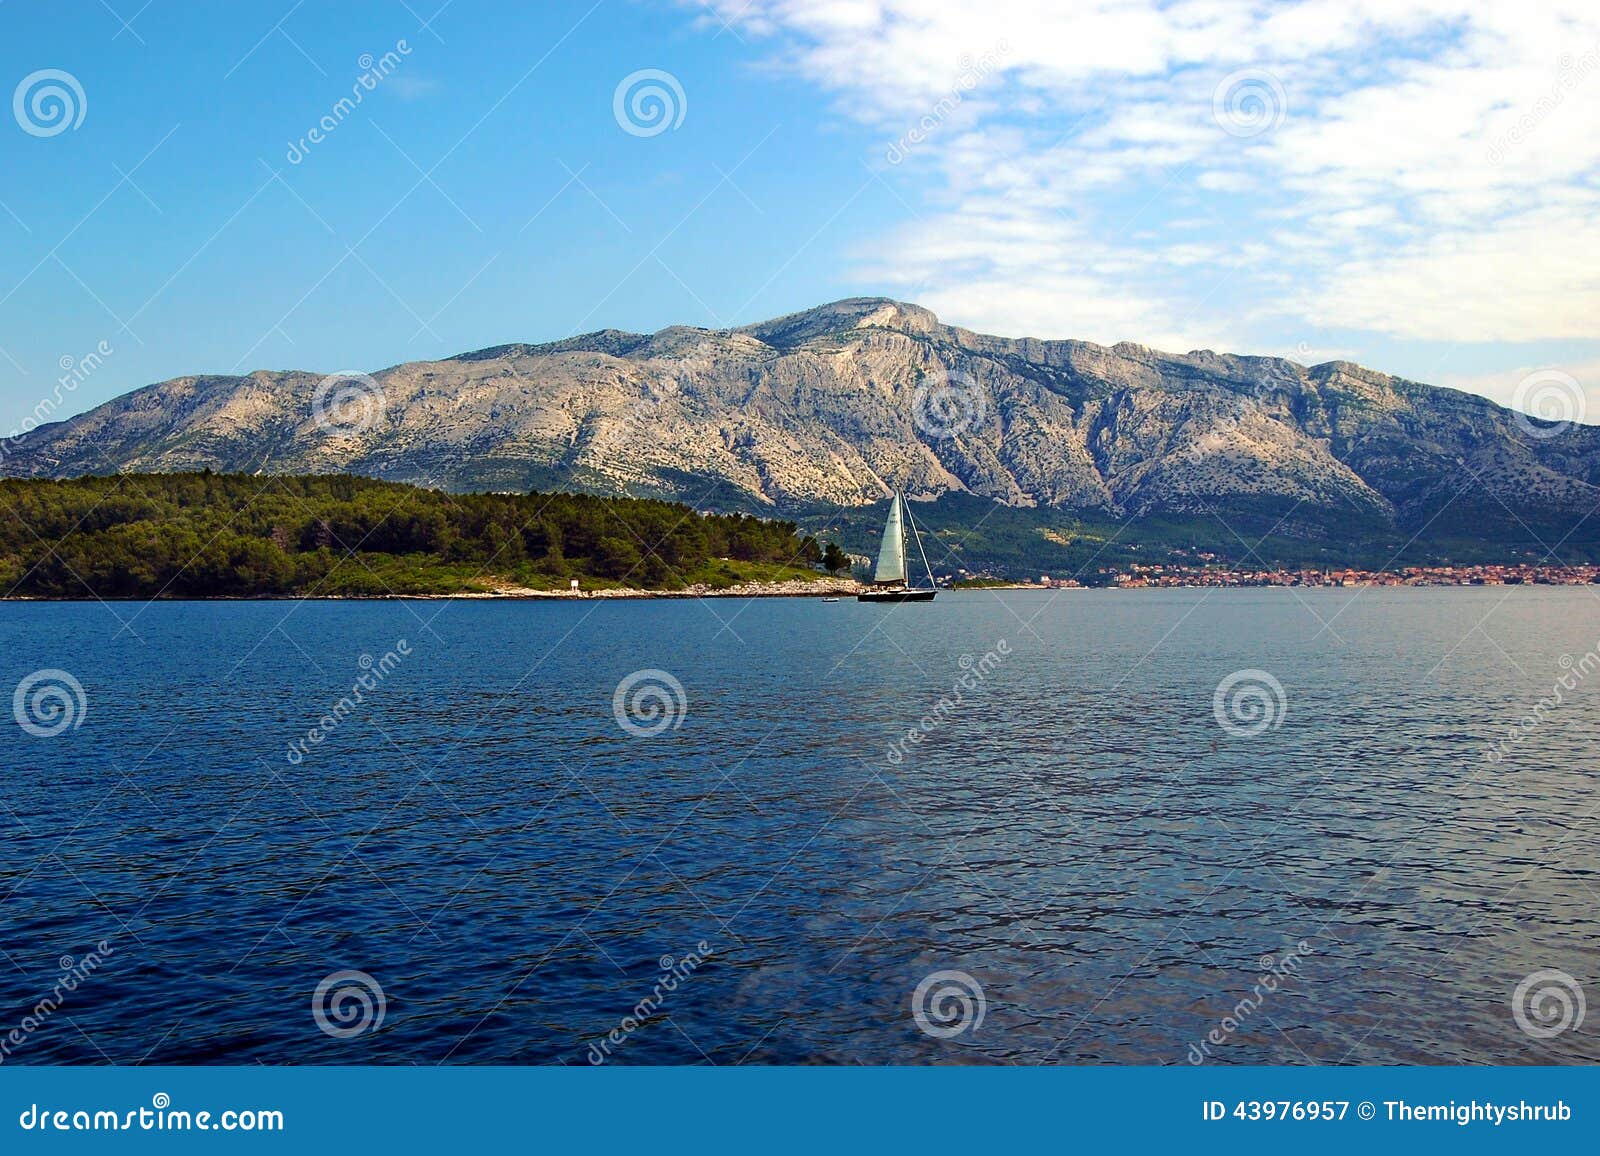 the view of the mountains on the mainland from the vacation island of korcula